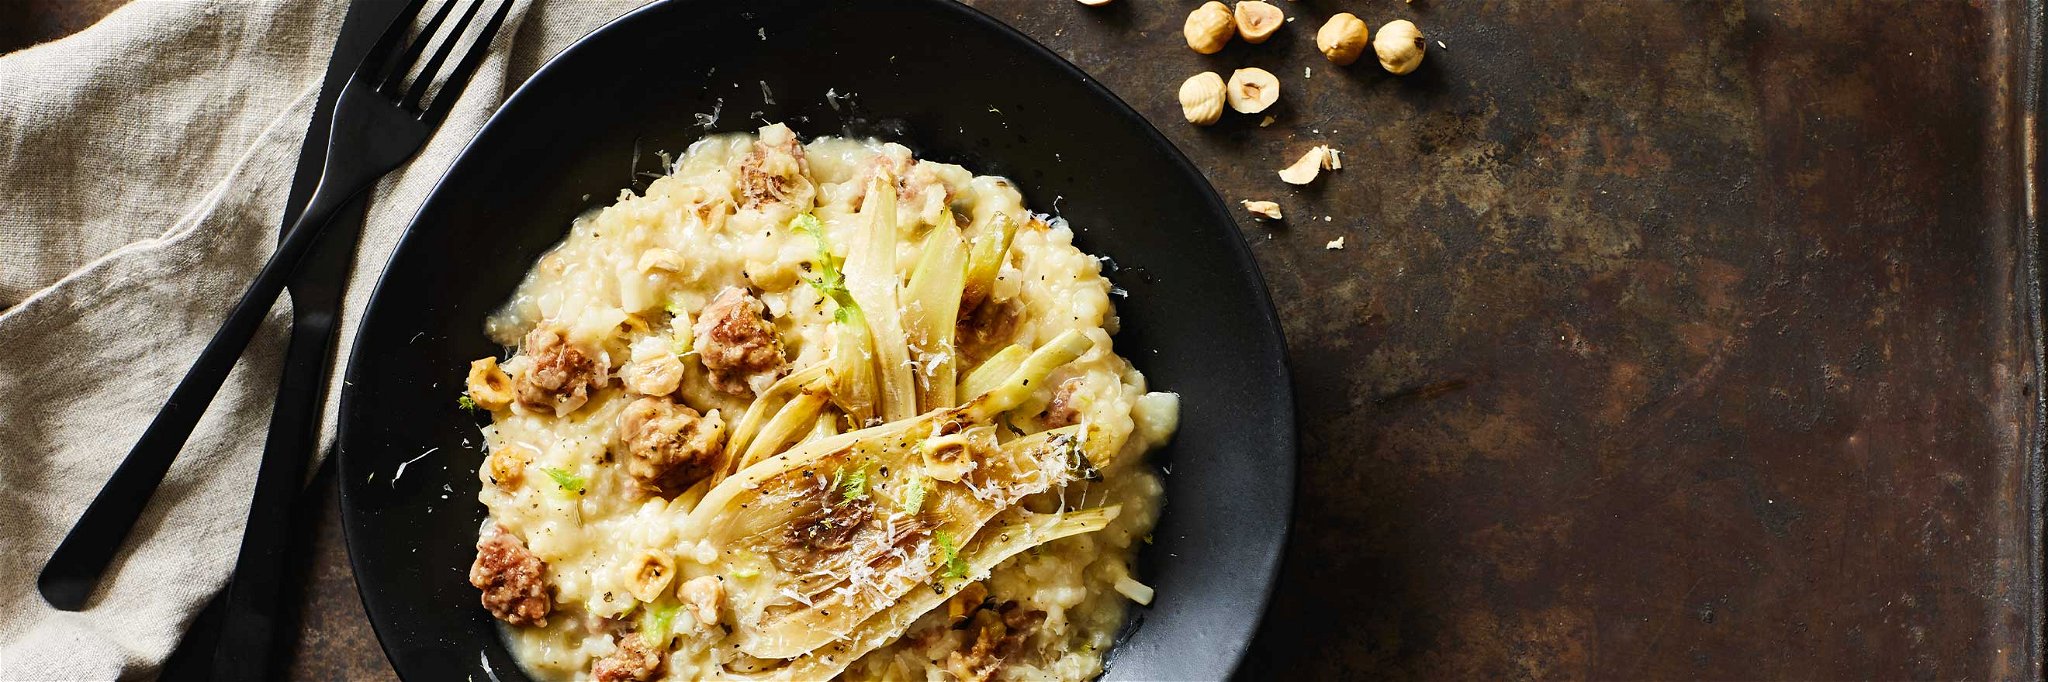 Fennel and Sausage Risotto